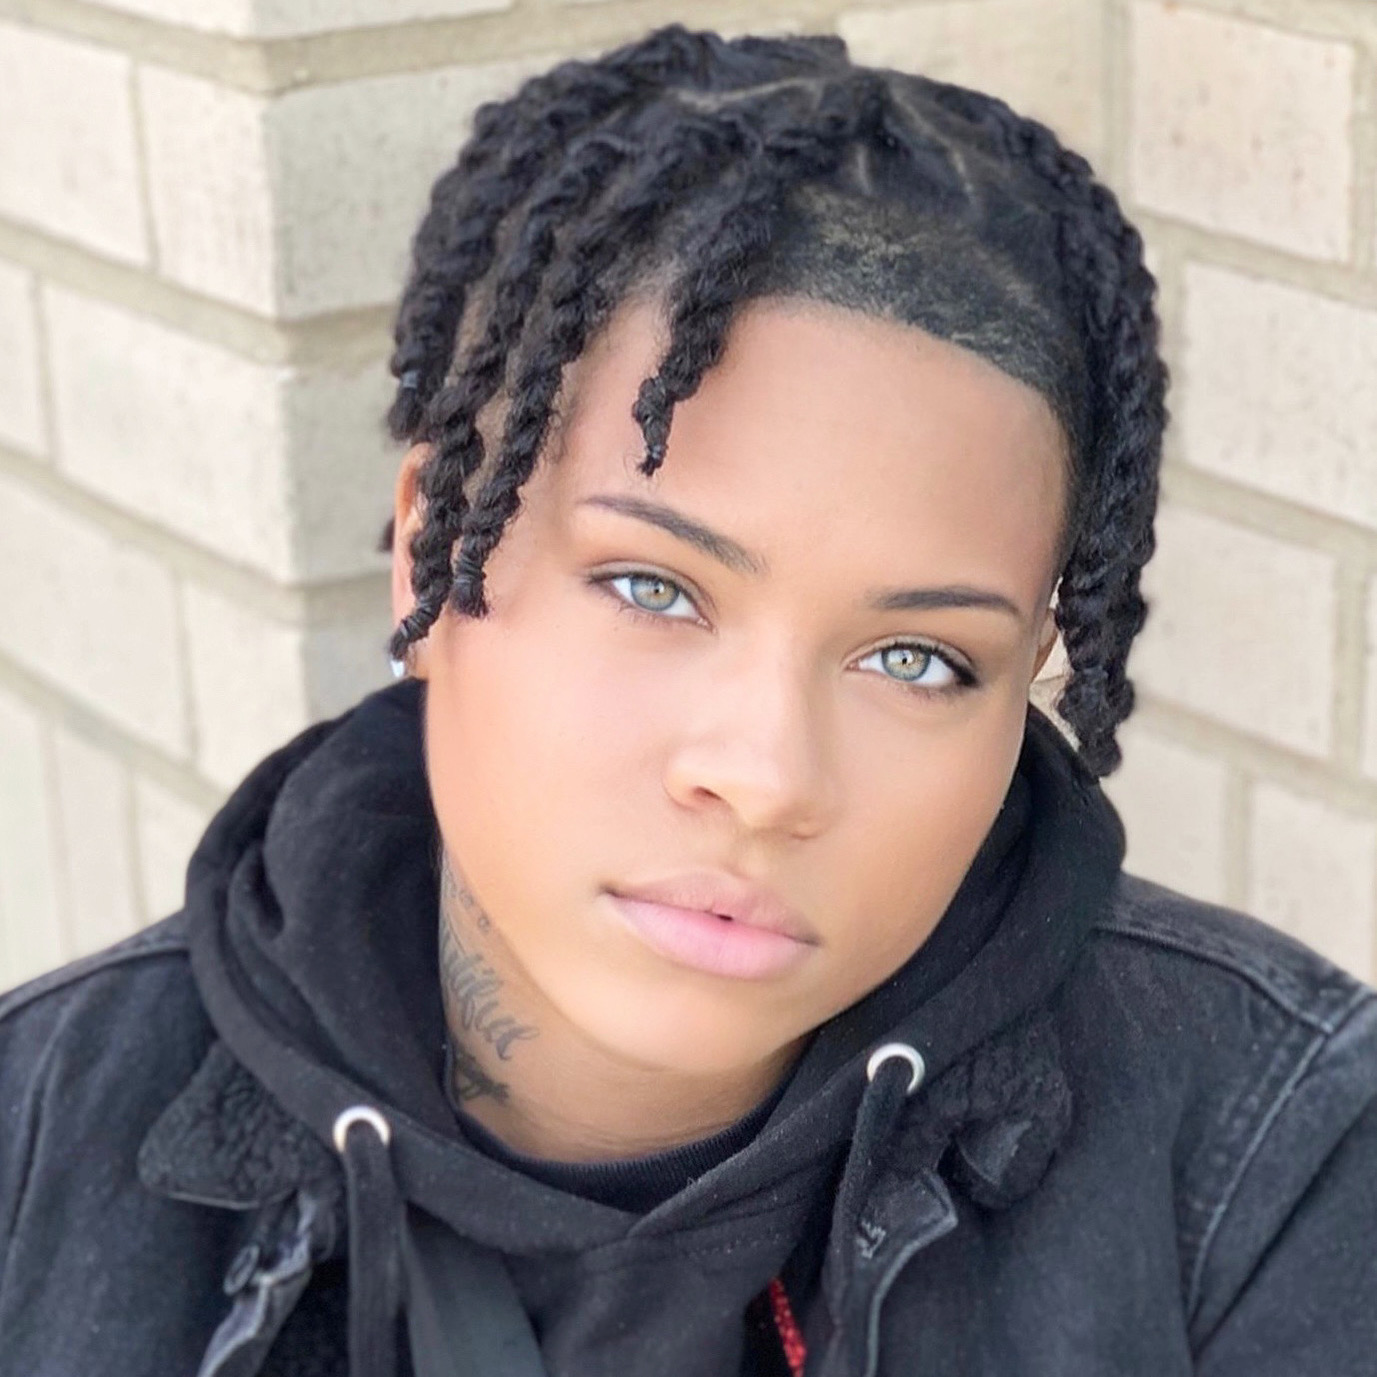 LGBT Model, Shai Snead Relocates To Washington DC, Plans To Model For Famous Fashion Brands